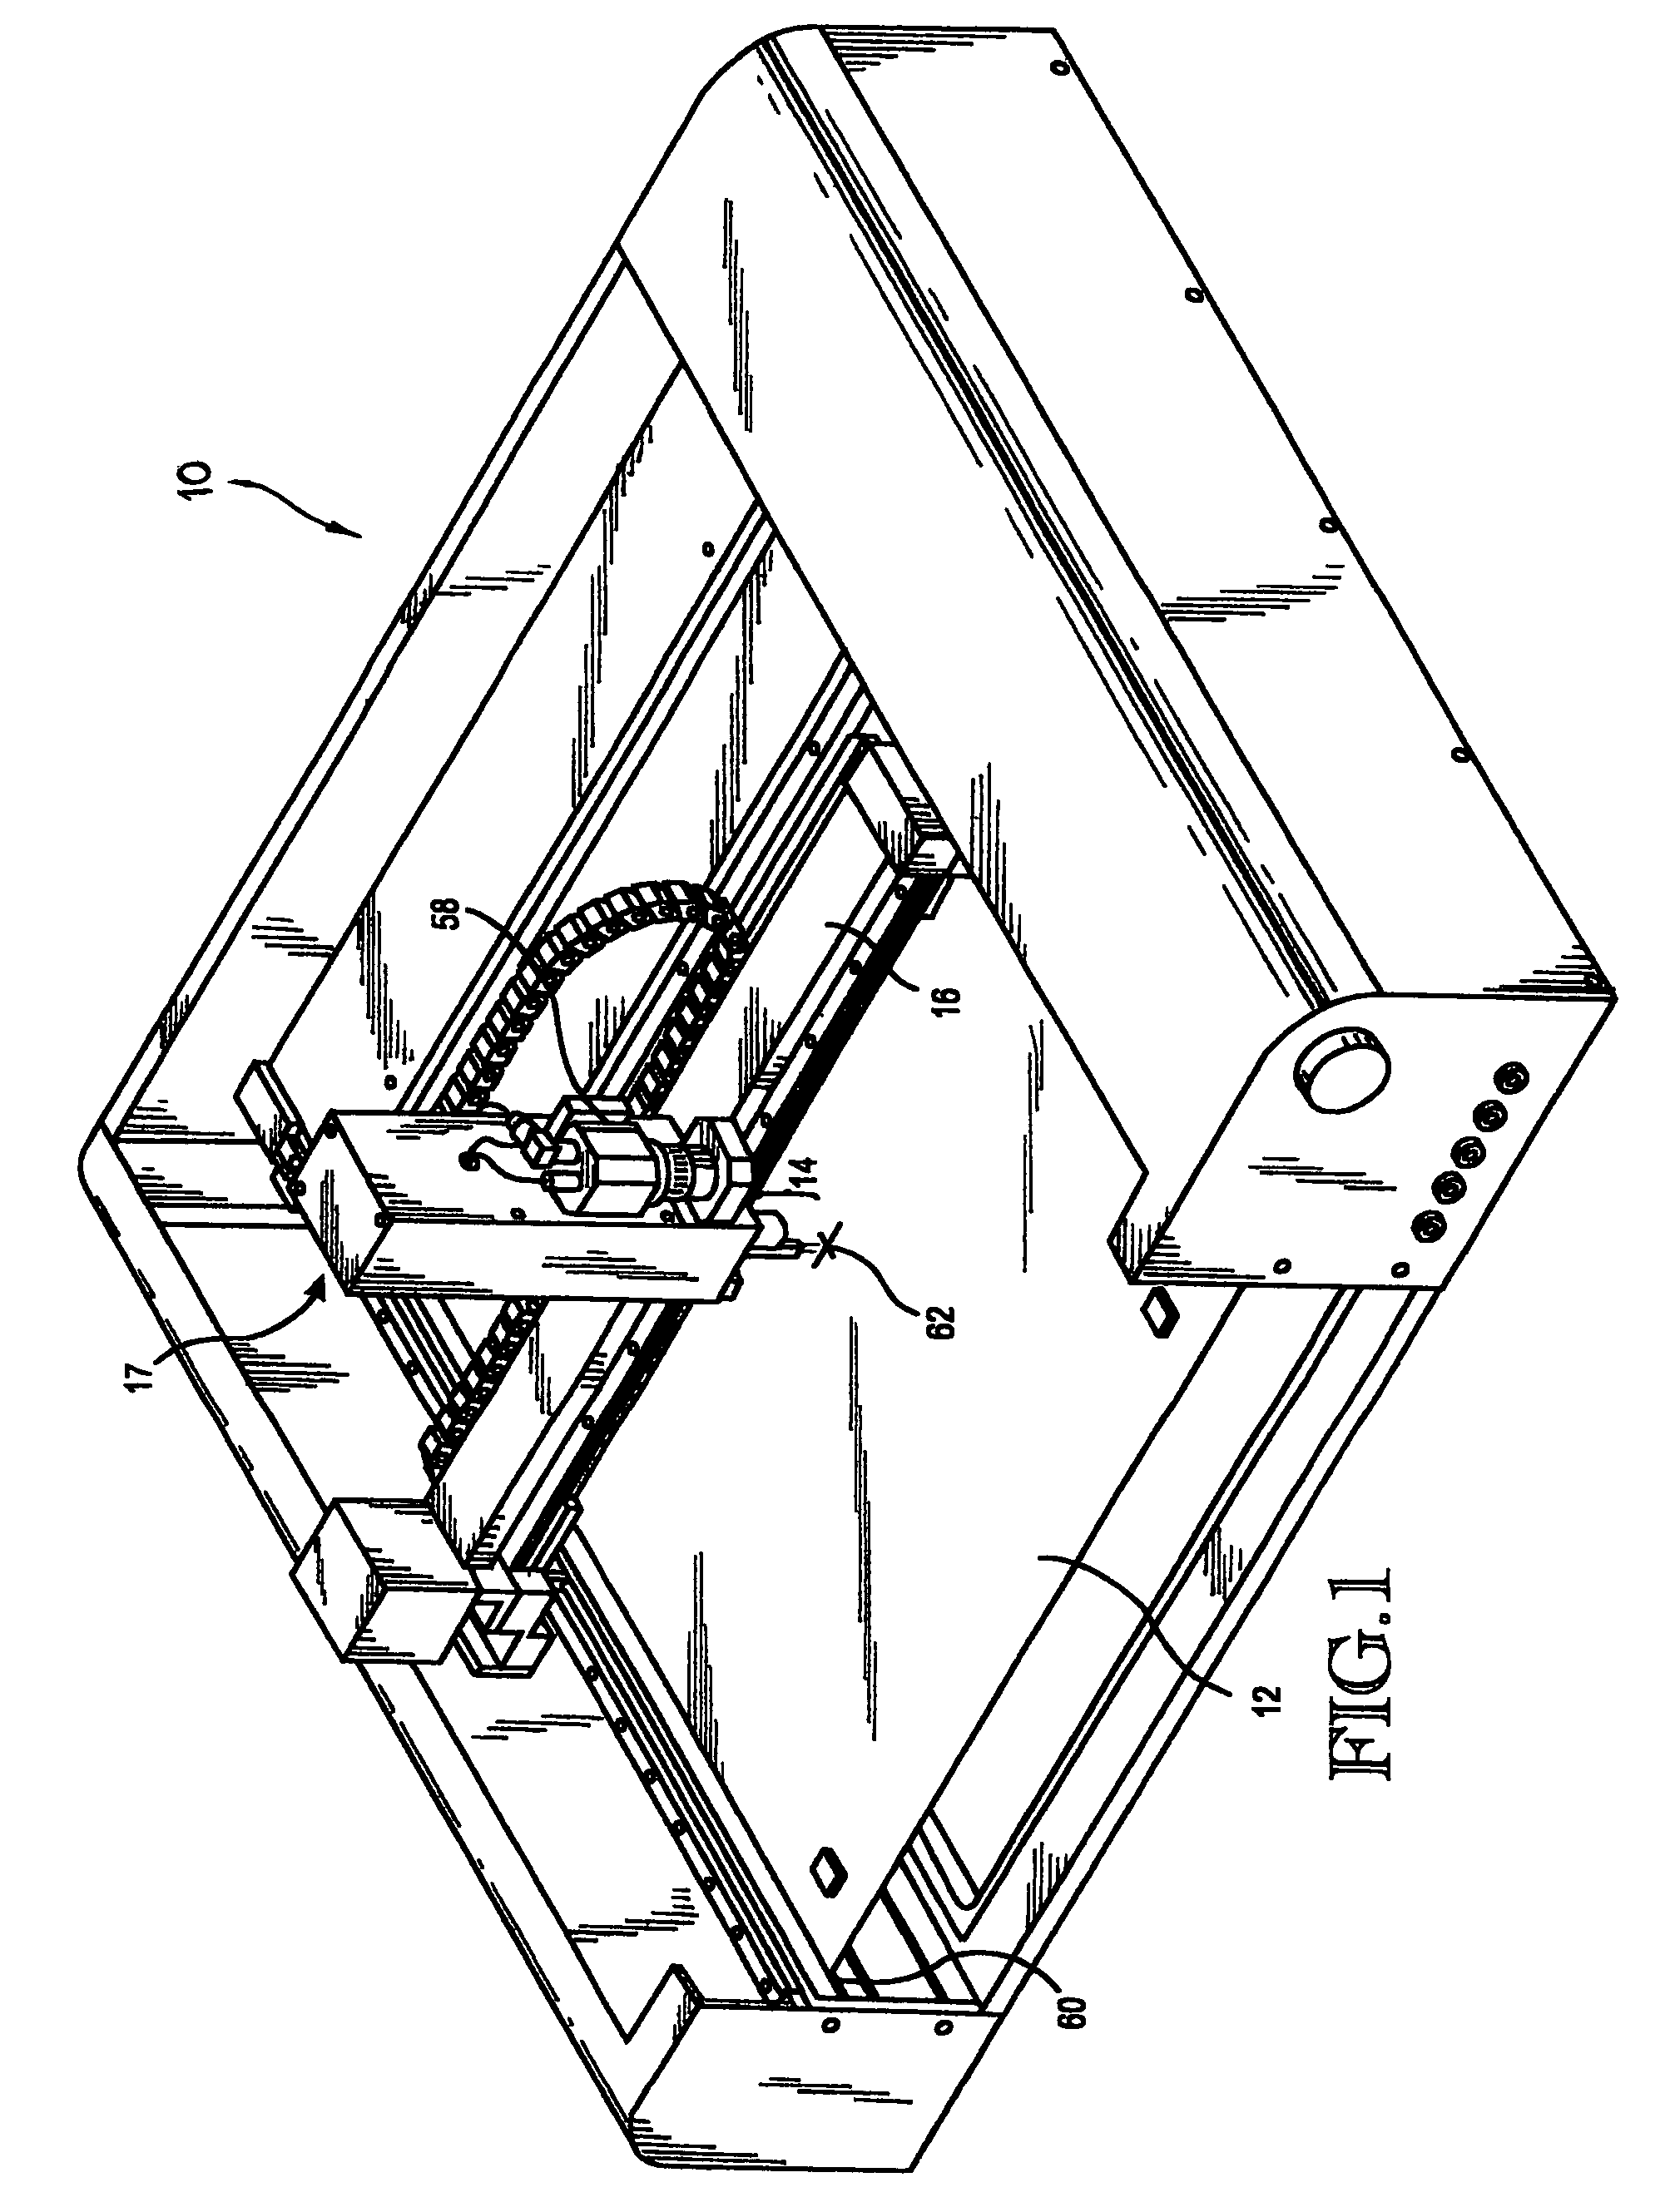 Dual probe assembly for a printed circuit board test apparatus